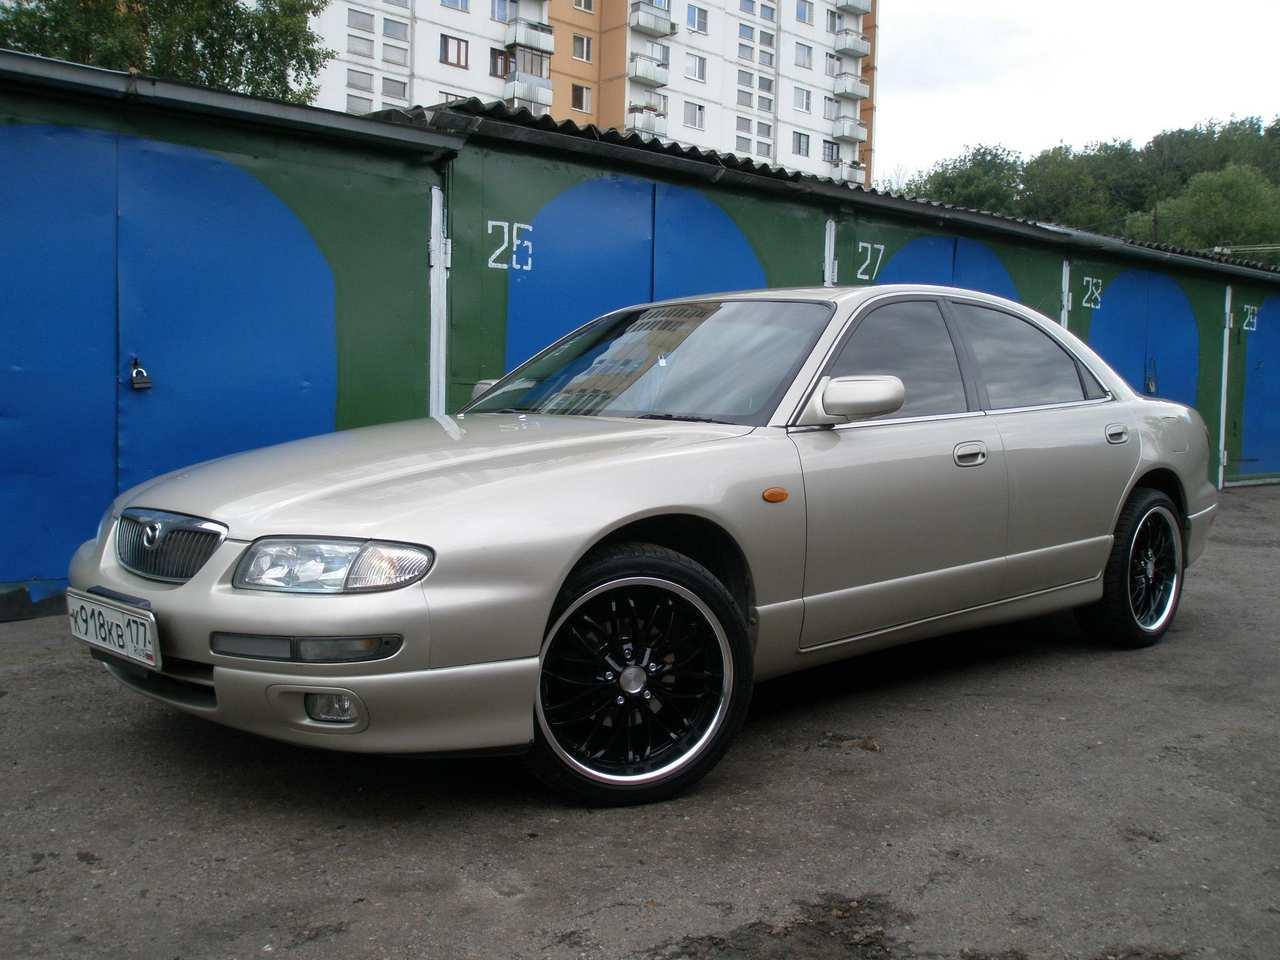 2000 Mazda Millenia - Information and photos - Neo Drive